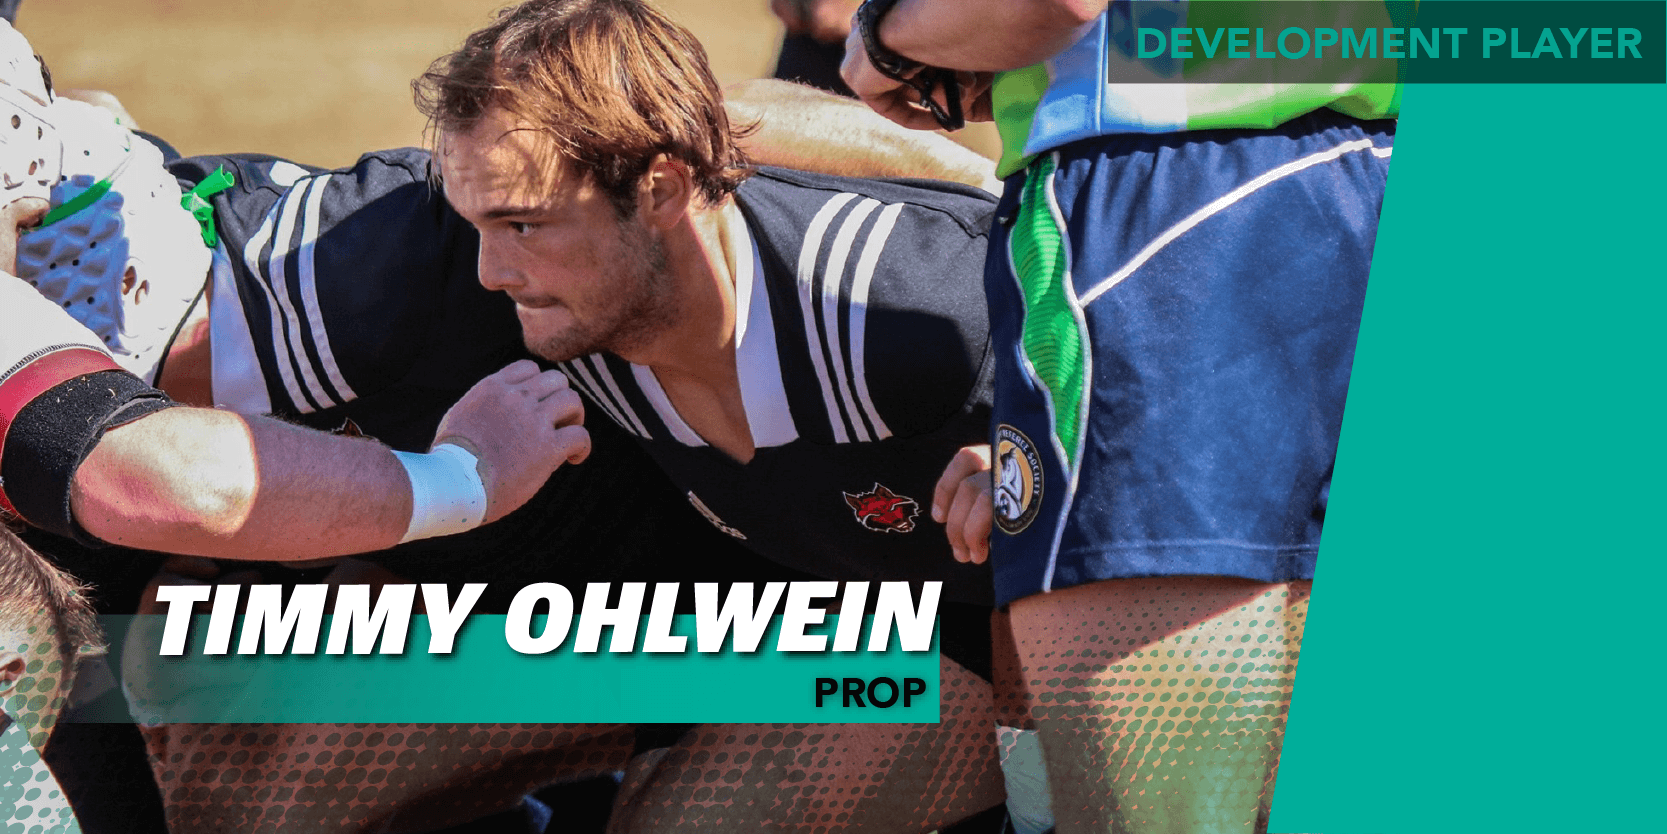 Chicago Native Timmy Ohlwein Signs as Development Player